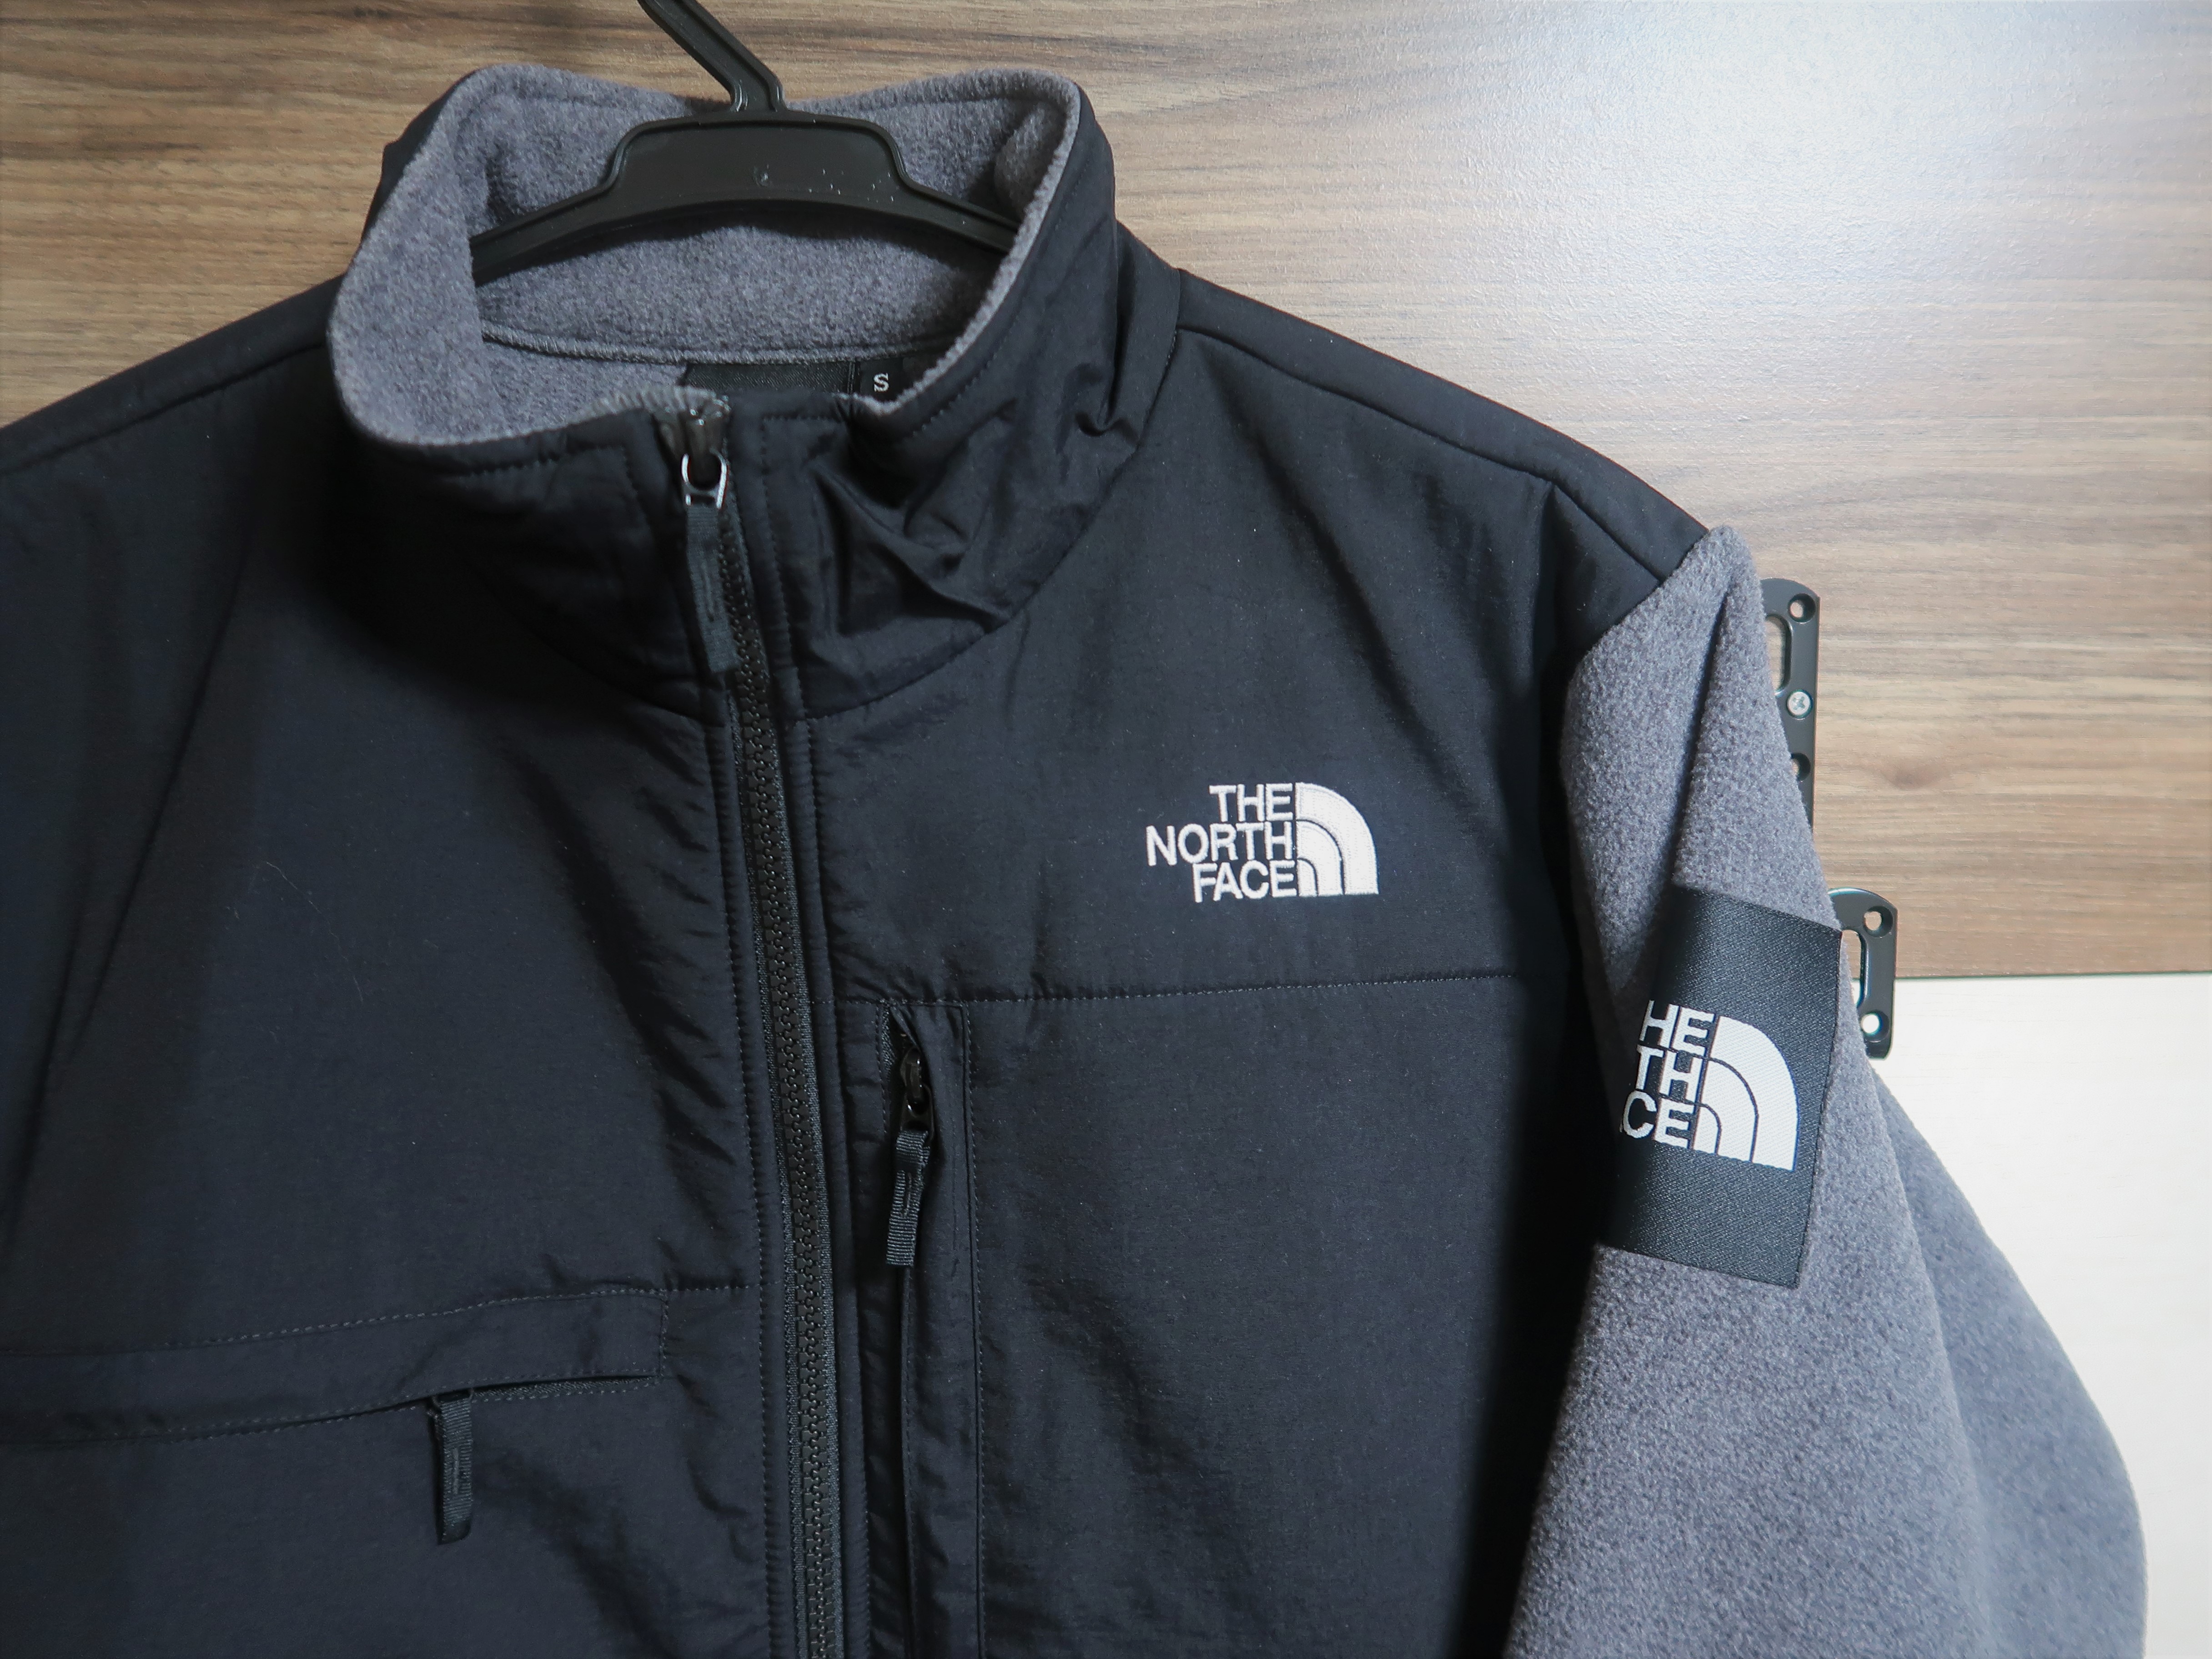 THE NORTH FACE】デナリジャケットのサイズ感などを写真付きで評価 